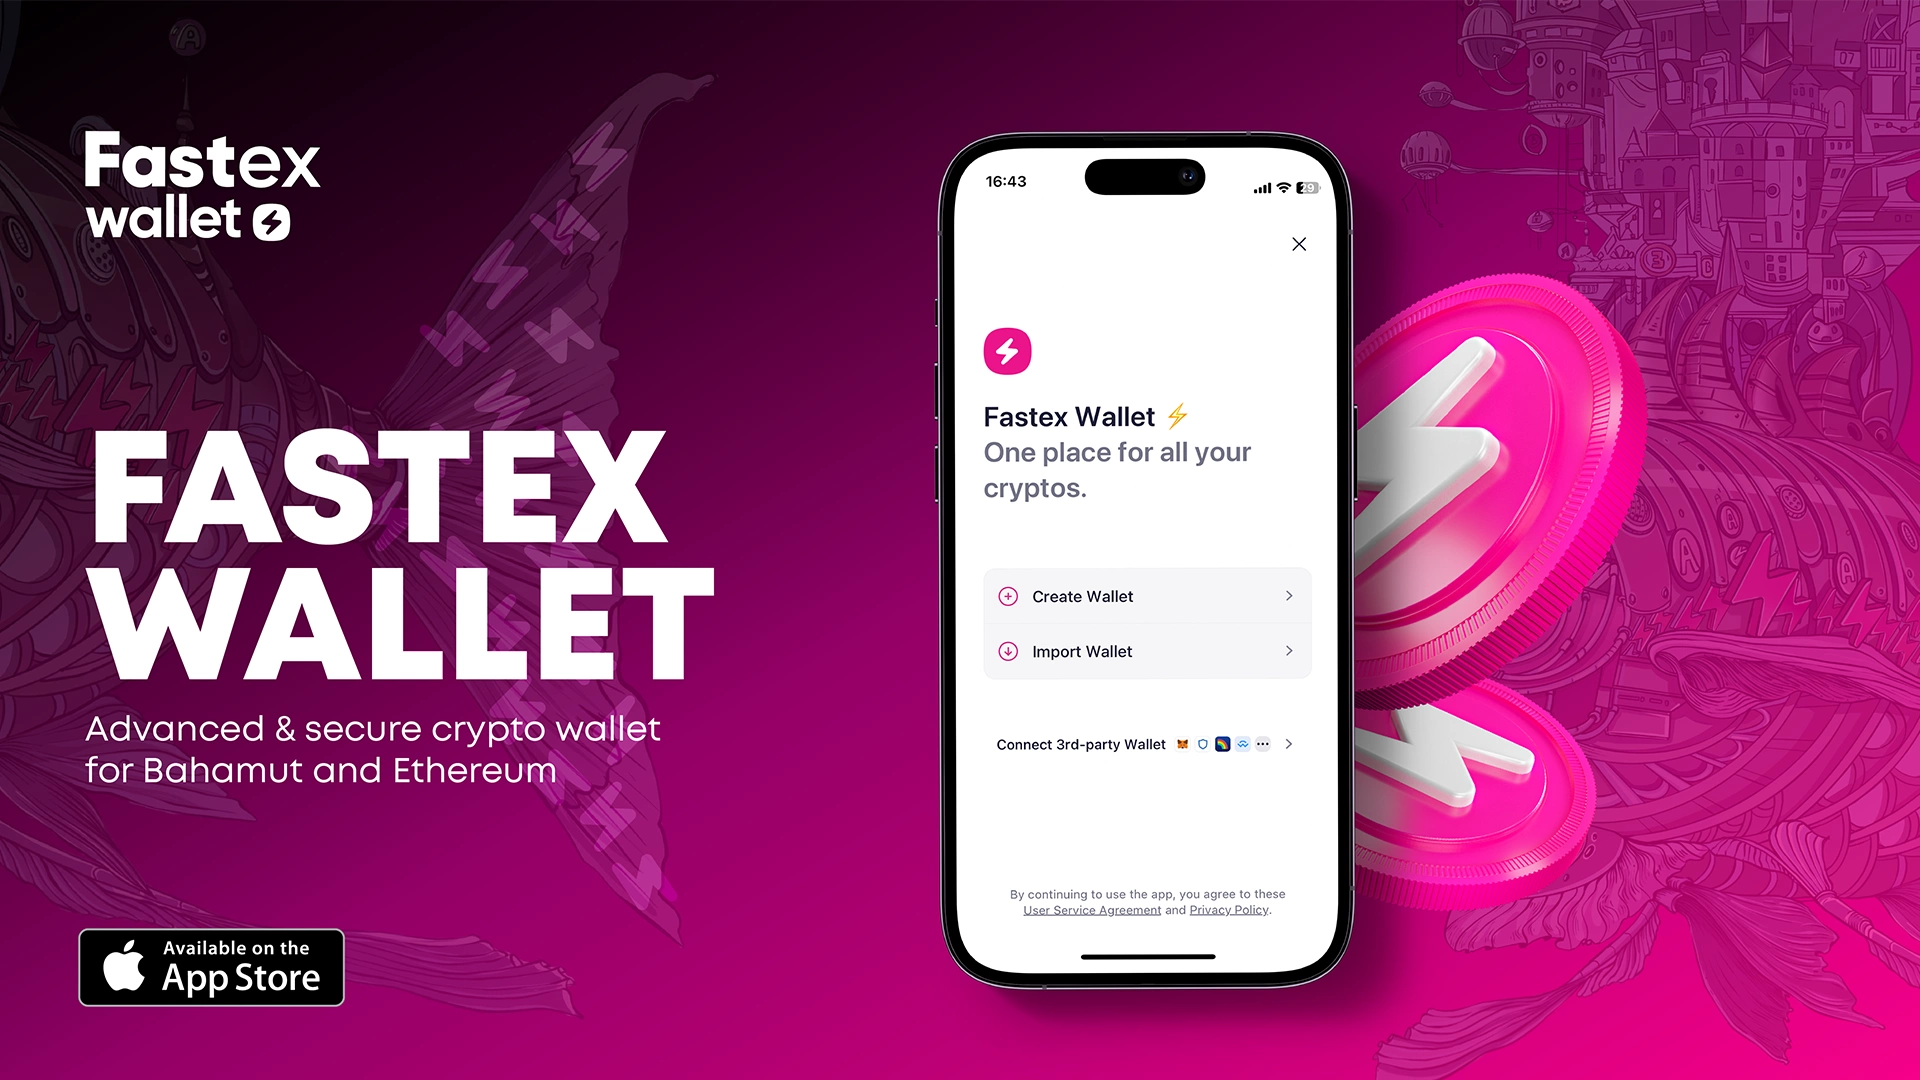 Fastex Wallet Launches on App Store